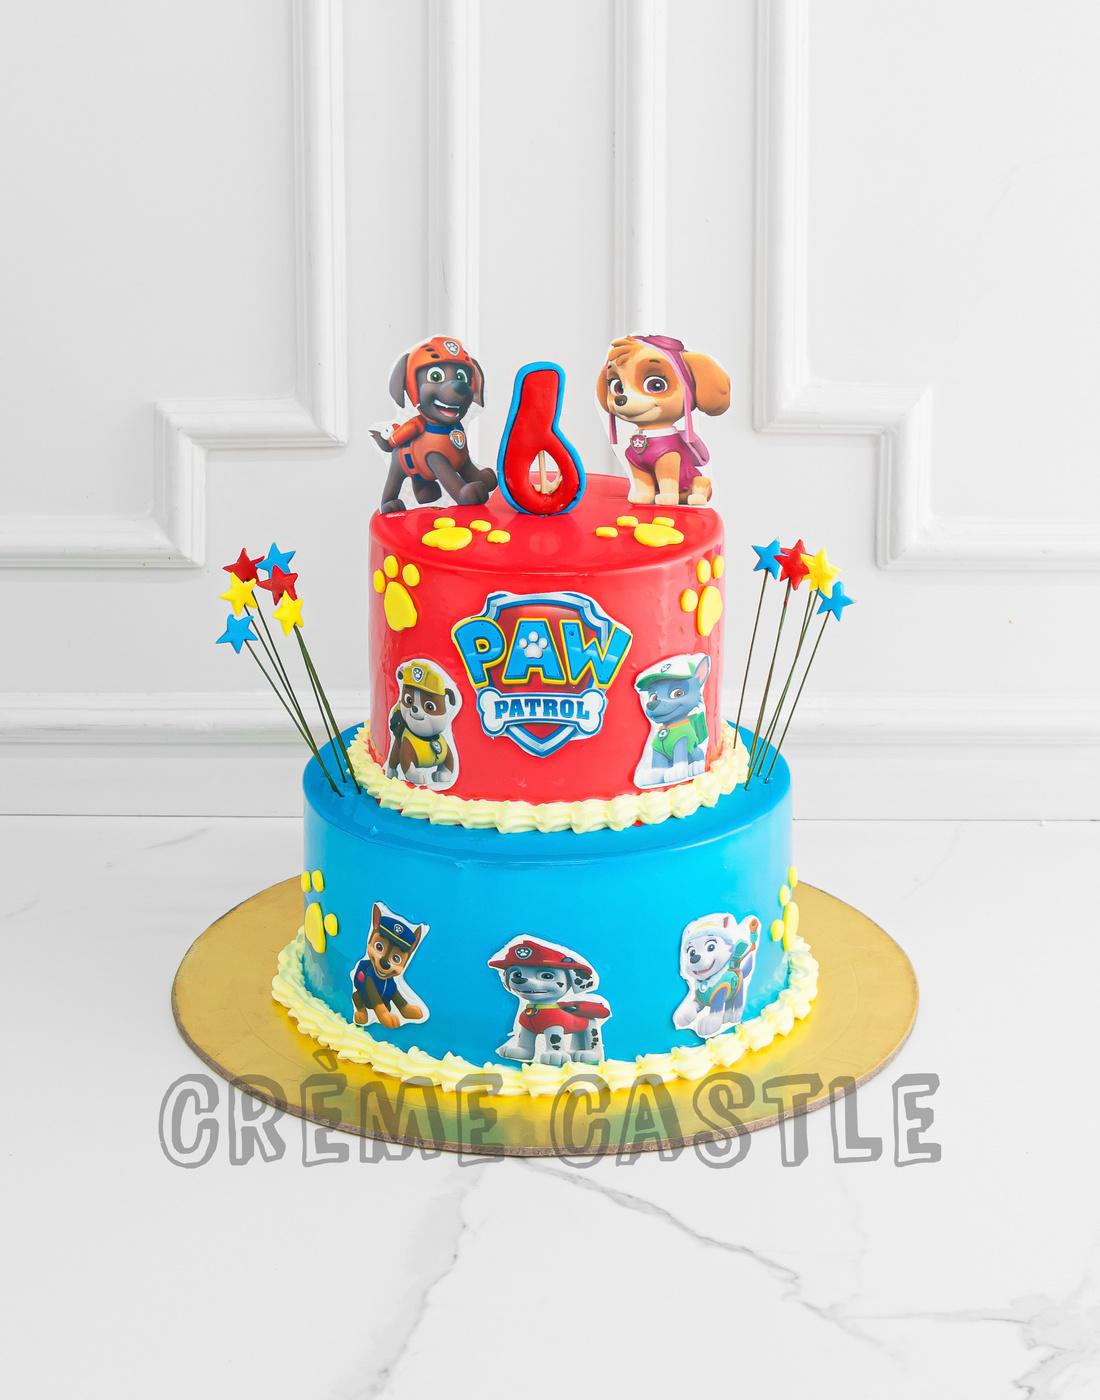 Paw Patrol Theme Cake in 2 Tier by Creme Castle